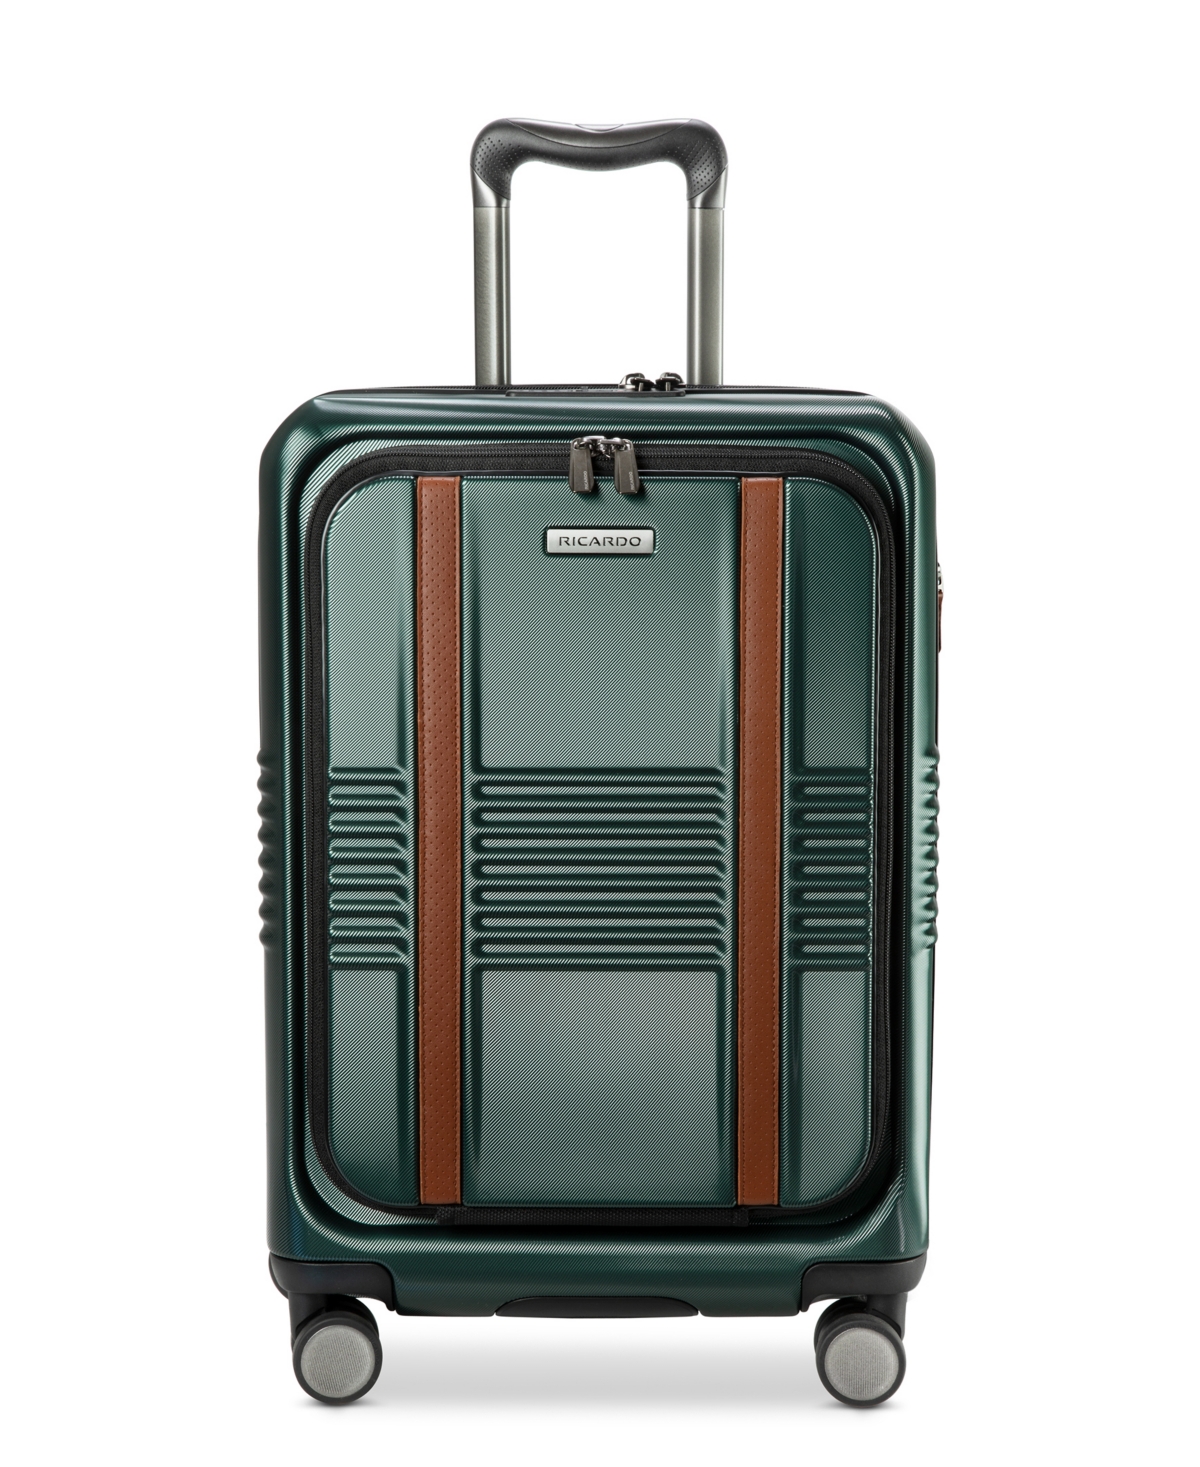 Cabrillo 3.0 Hardside 21" Carry-On with FastAccess Front Pocket - Emerald